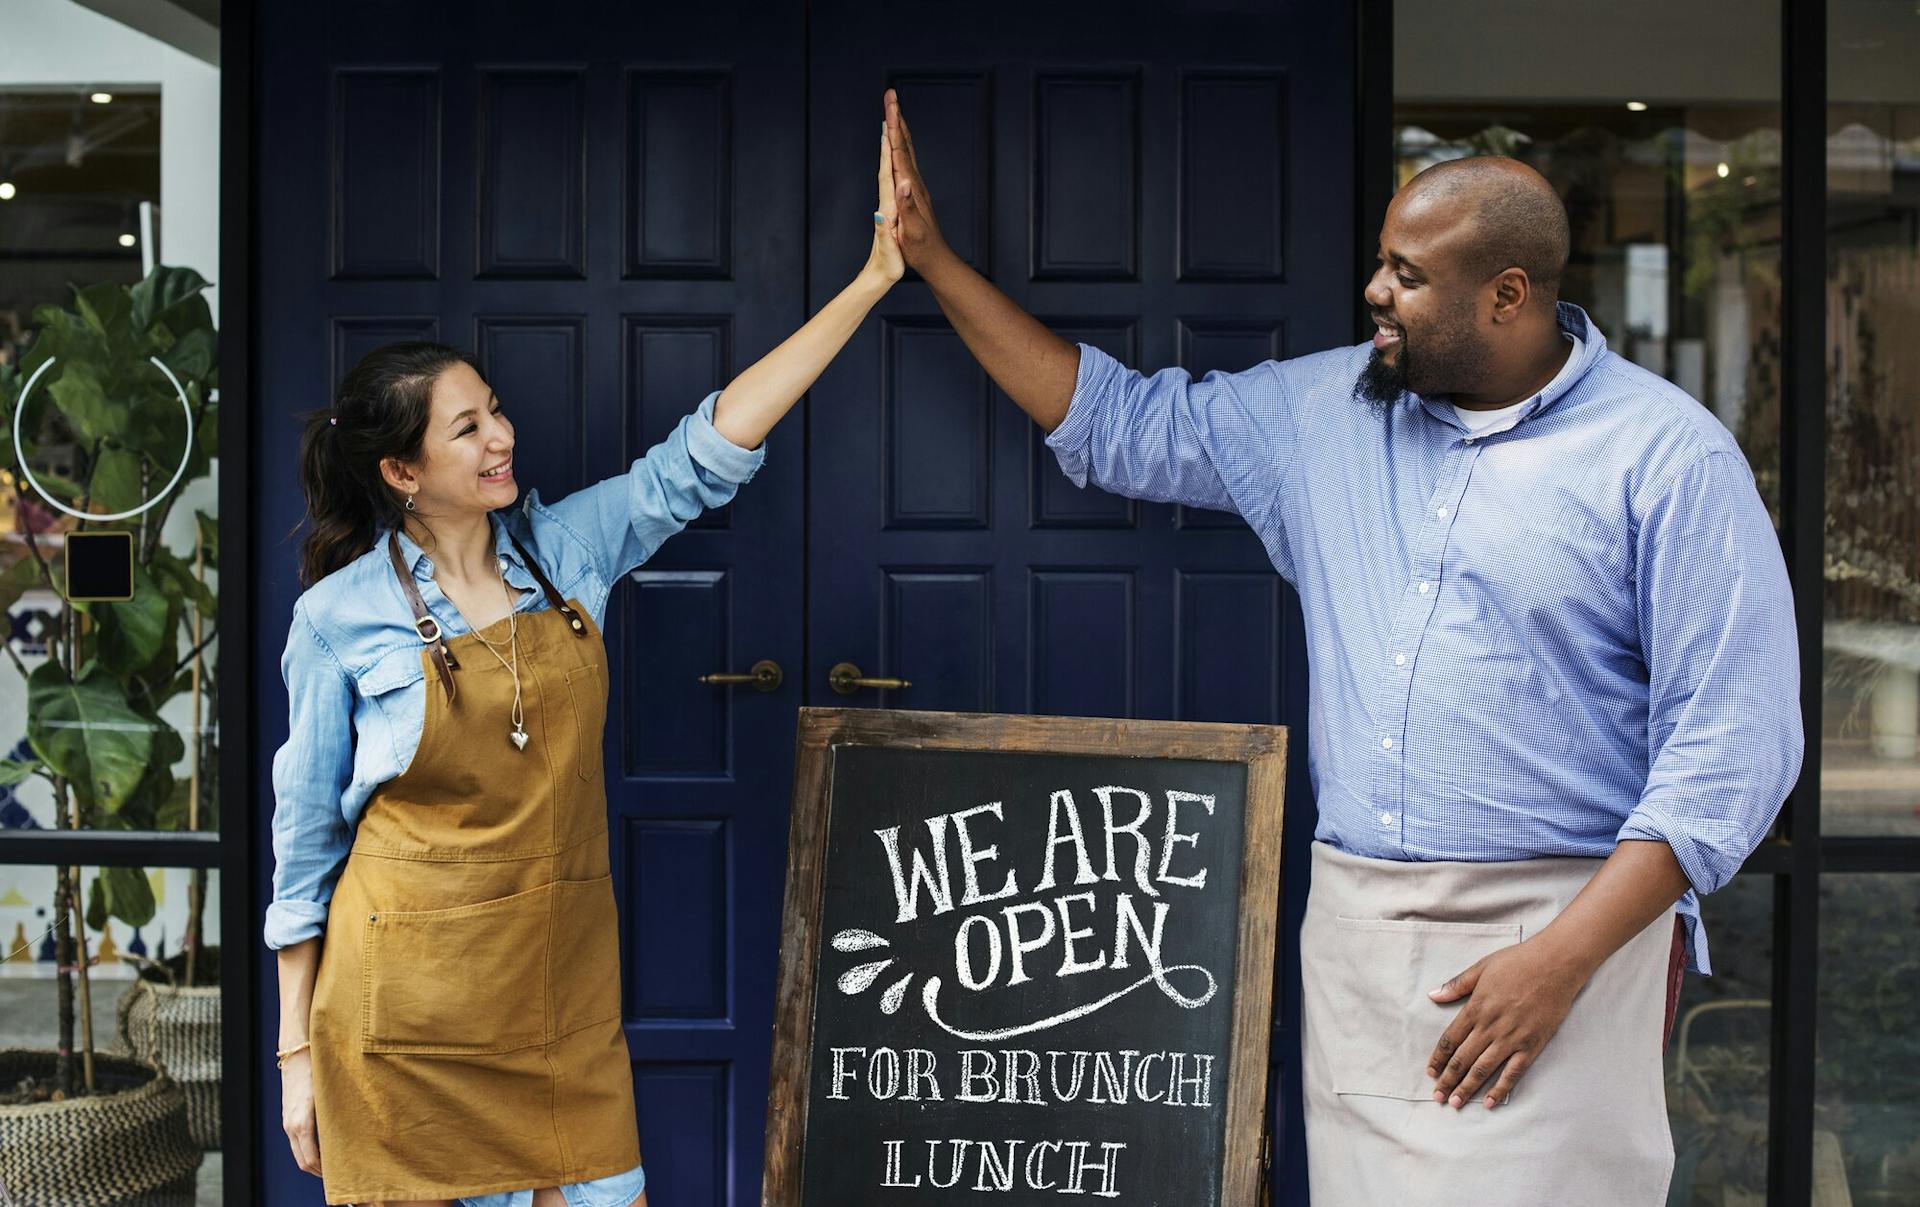 6 Marketing & Branding Tips To Attract More Restaurant Customers